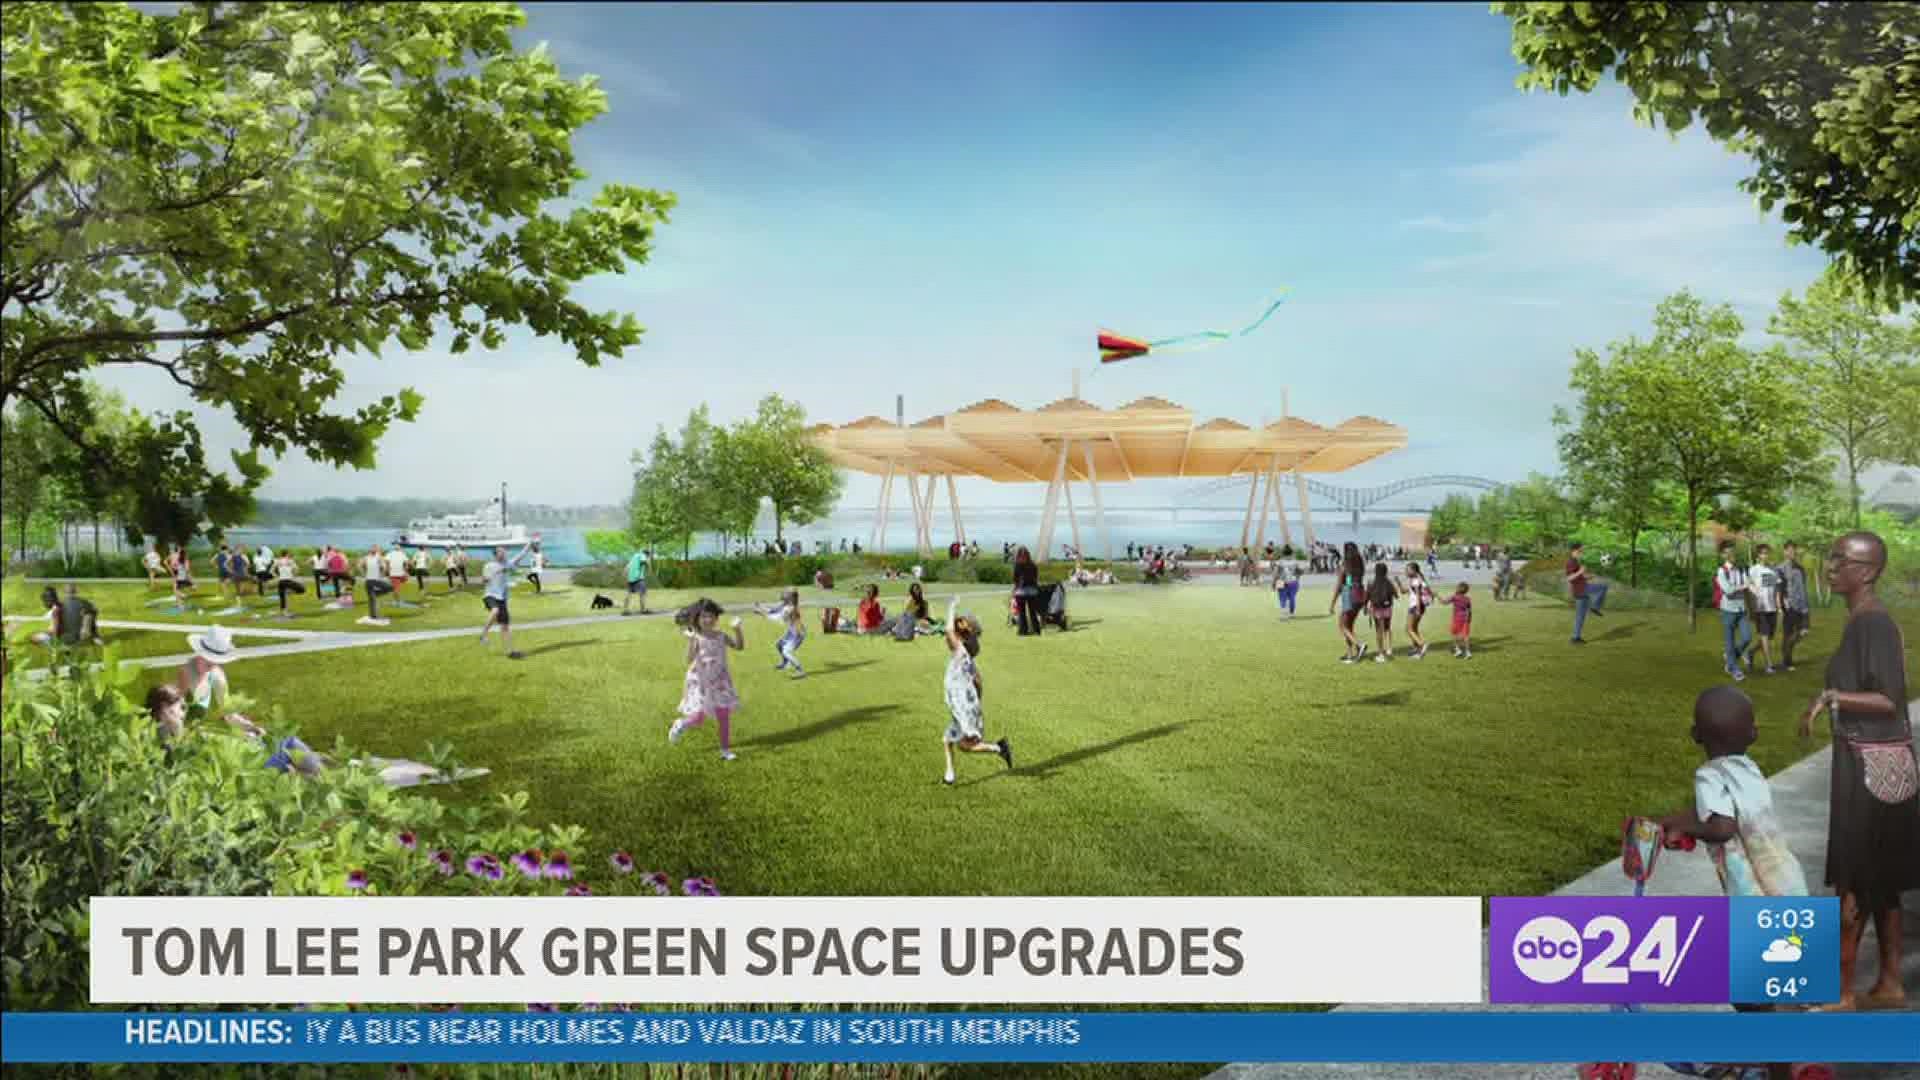 The Memphis riverfront fixture is being reimagined with new nature trails, open spaces and recreation areas.